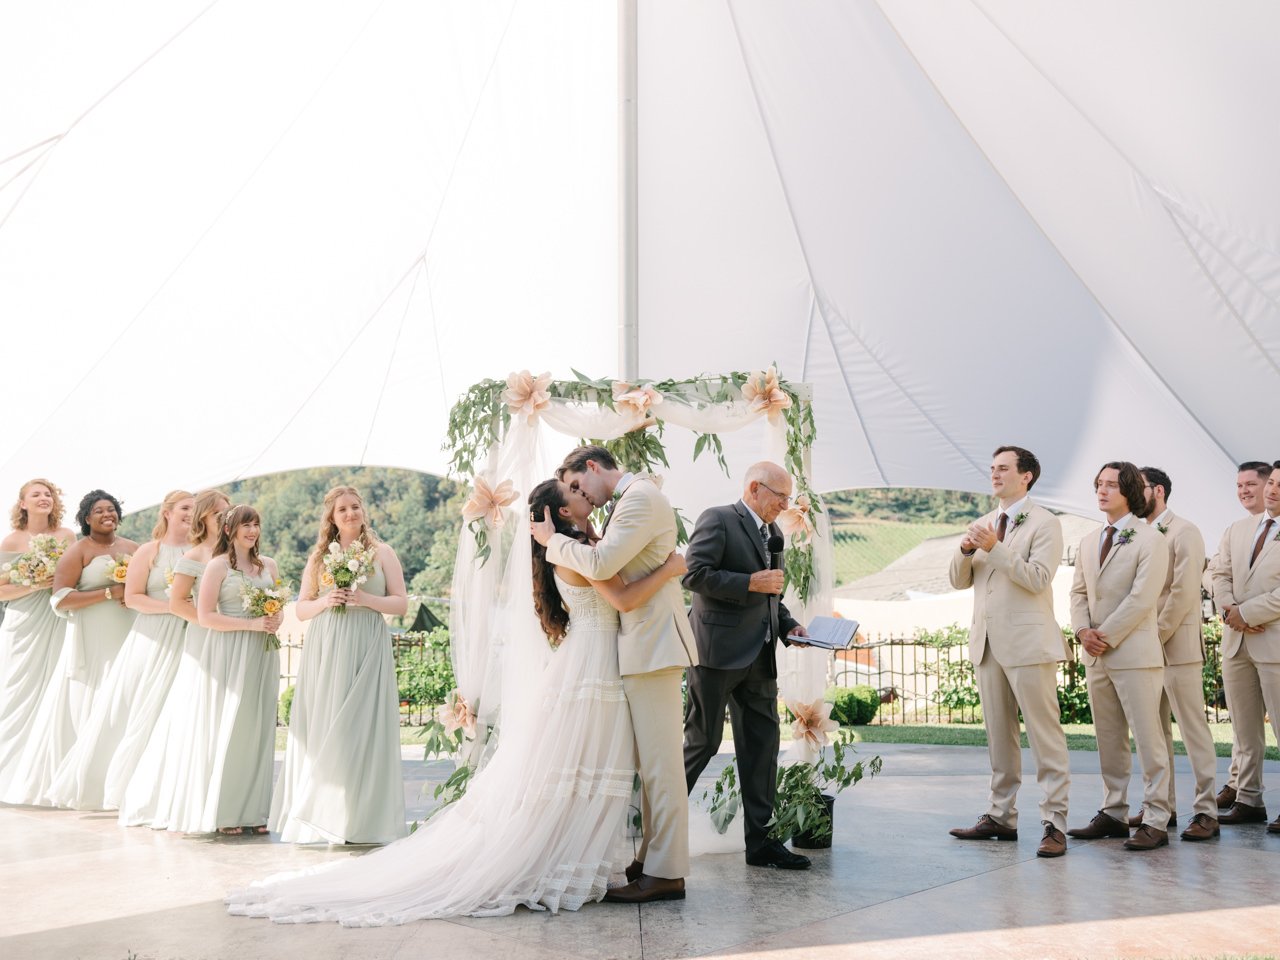  Bride and groom kiss under pink floral backdrop while wedding party in tan and green cheers under sun tent 